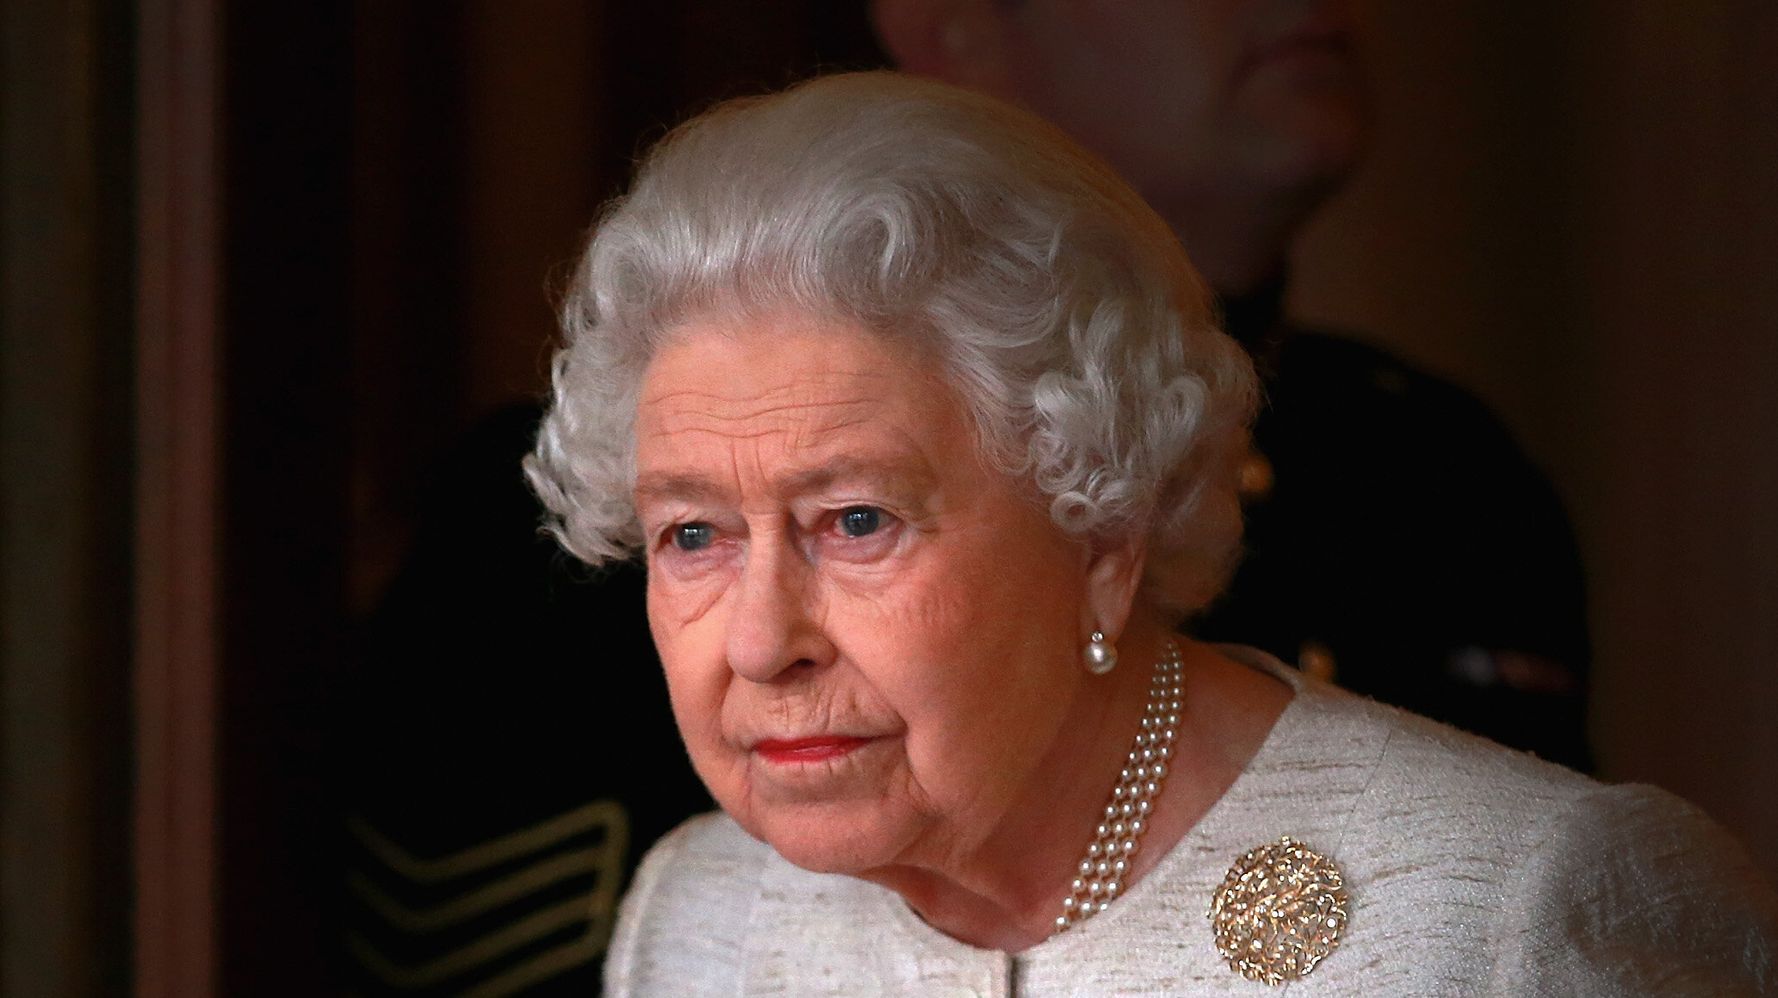 Portrait Of Queen Elizabeth Removed From Oxford Due To 'Colonial History'